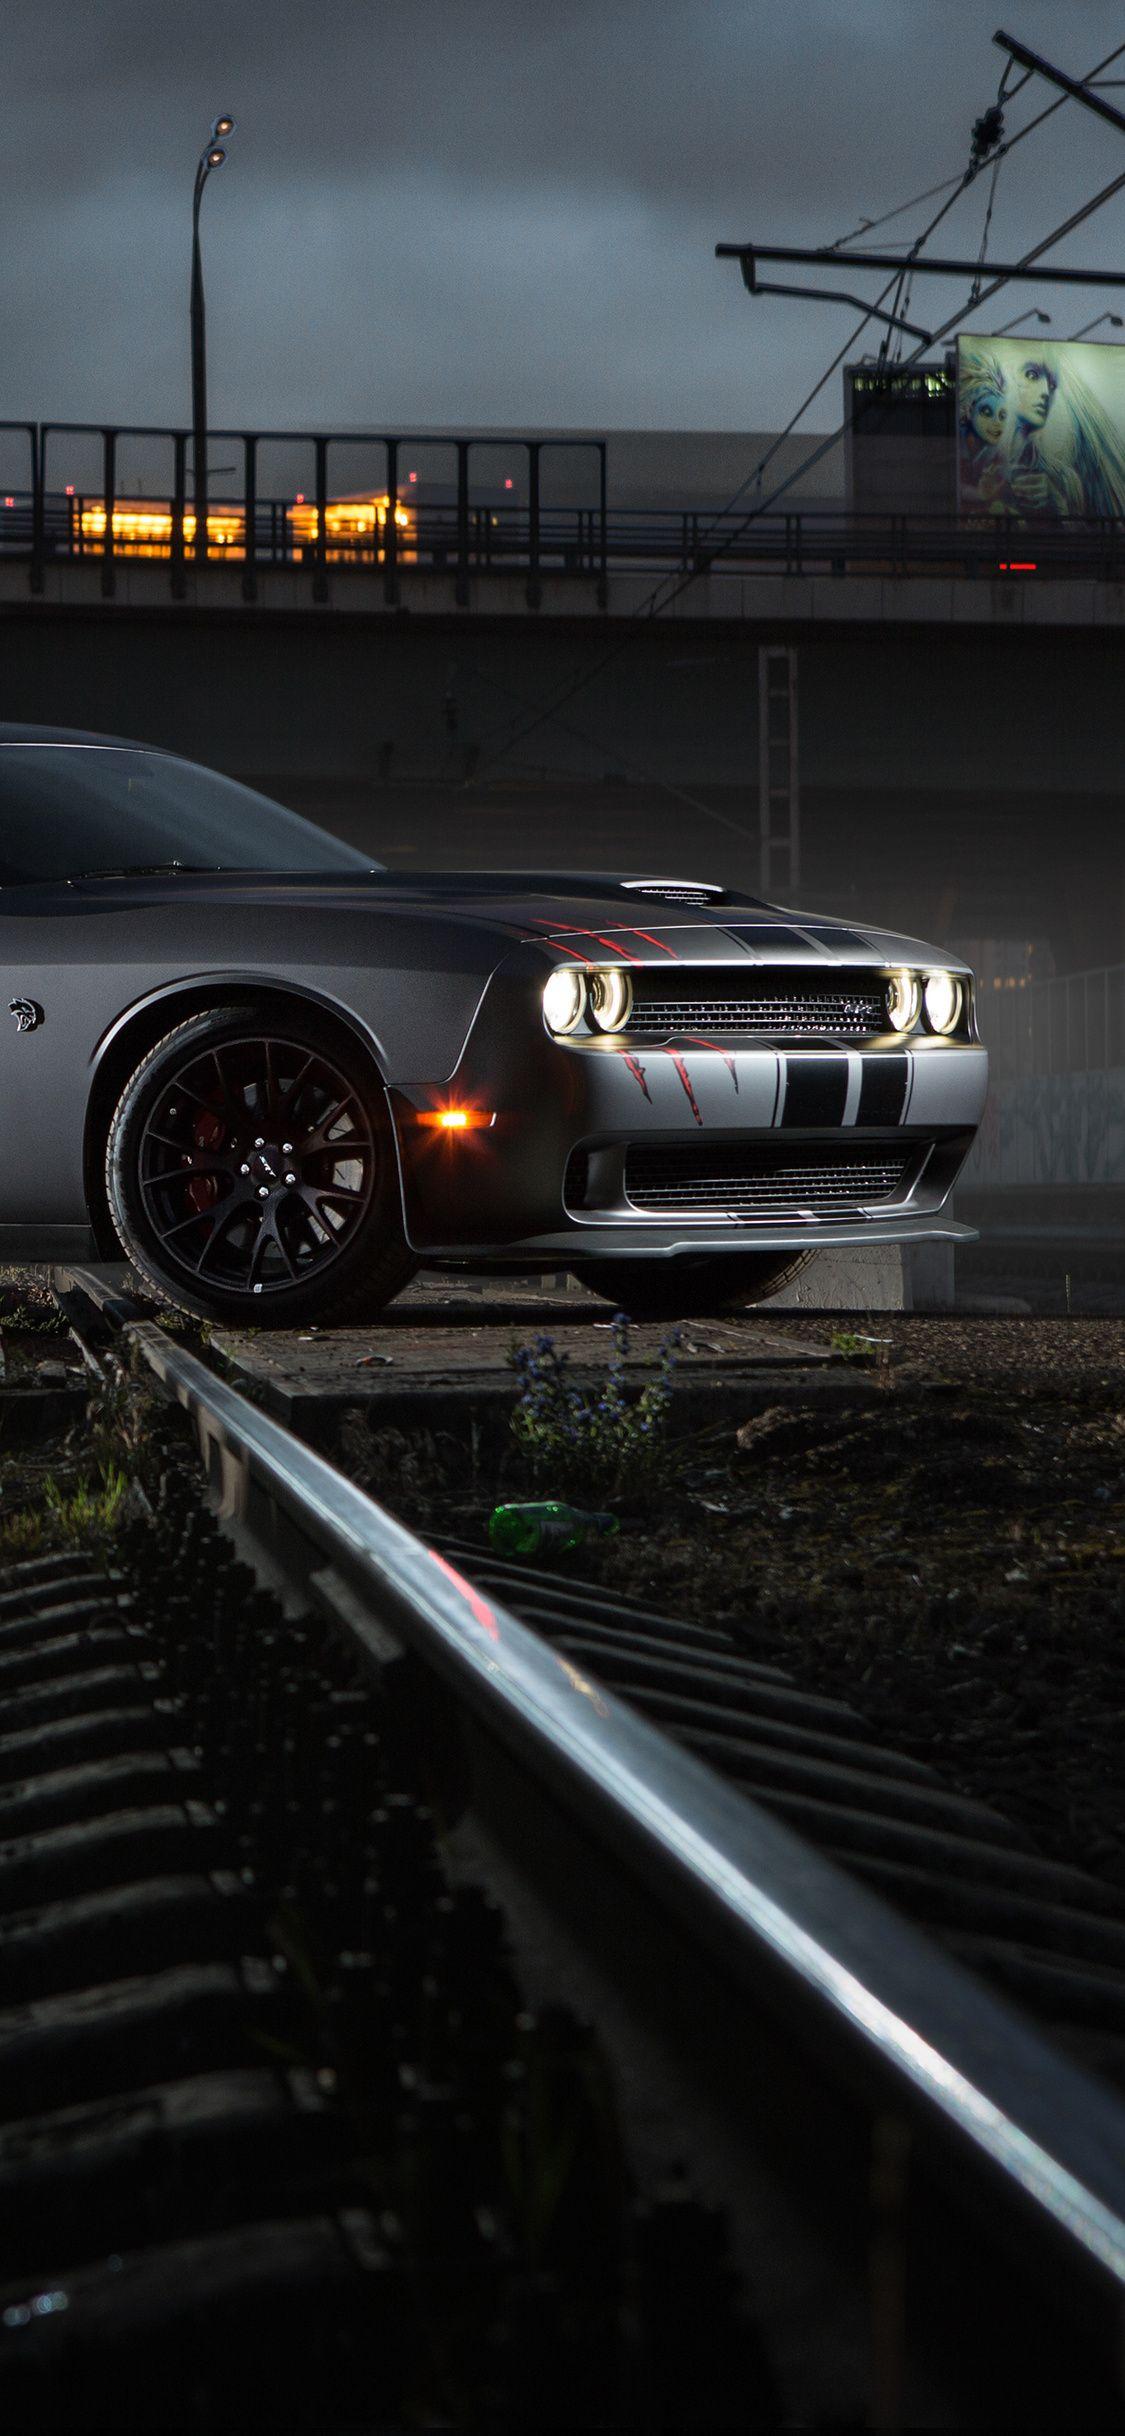 American Car Dodge Challenger Full HD Wallpapers Free Download - Best  Wallpapers